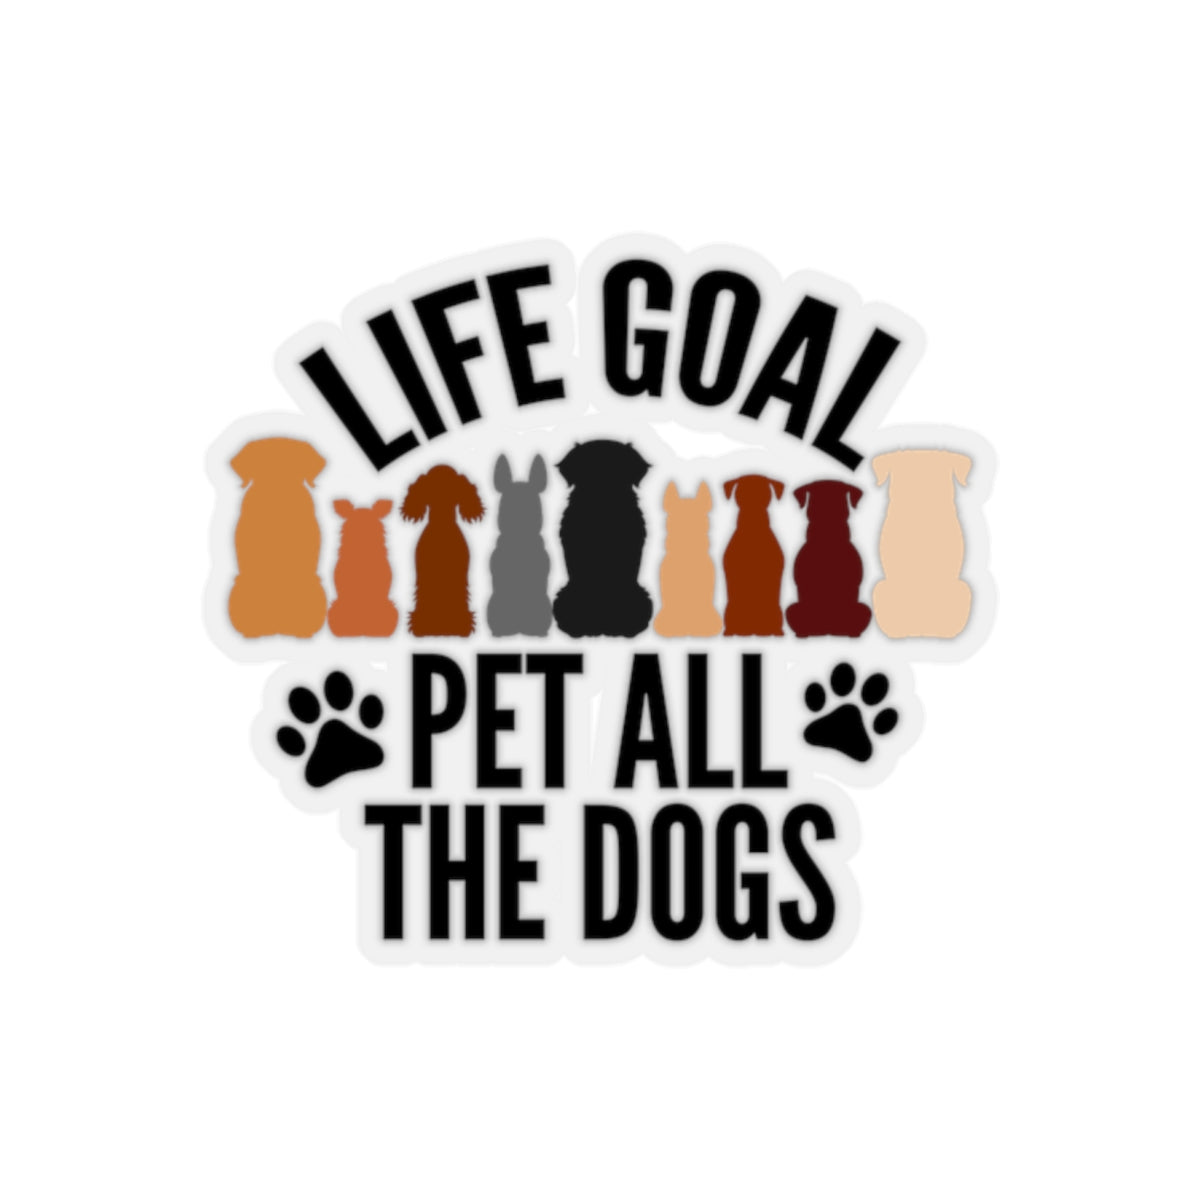 Pet All the Dogs Sticker